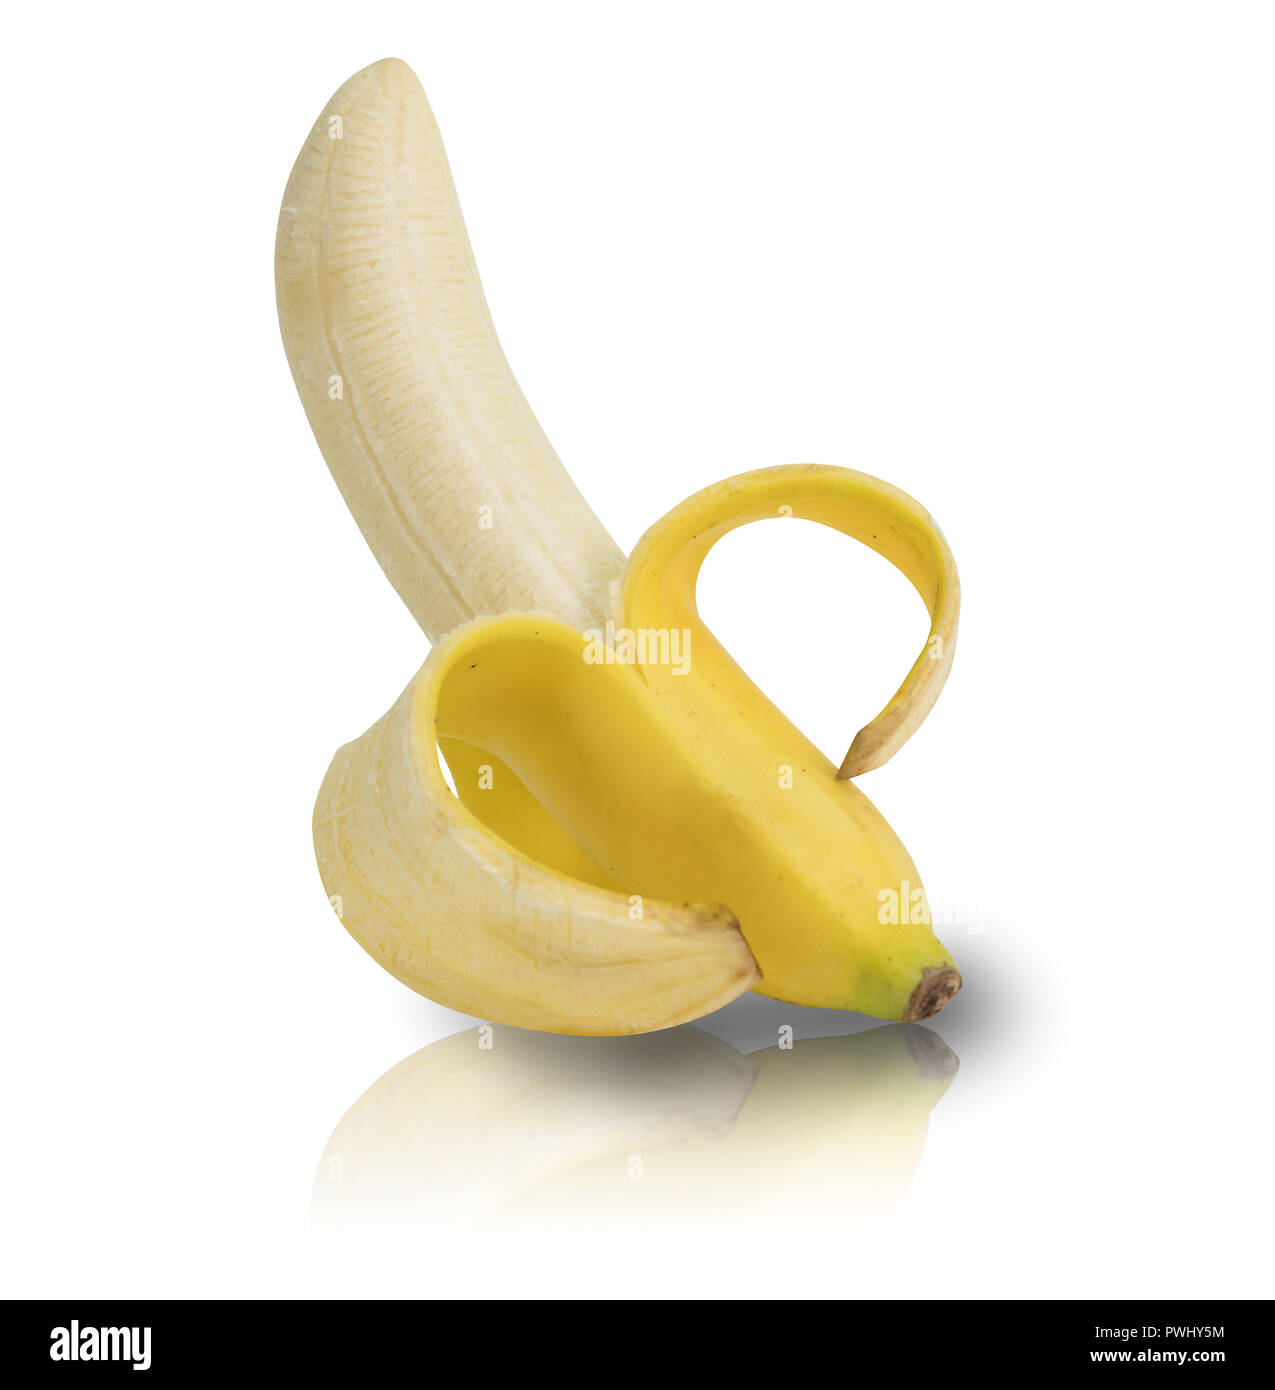 banana isolated on white background with clipping path Stock Photo